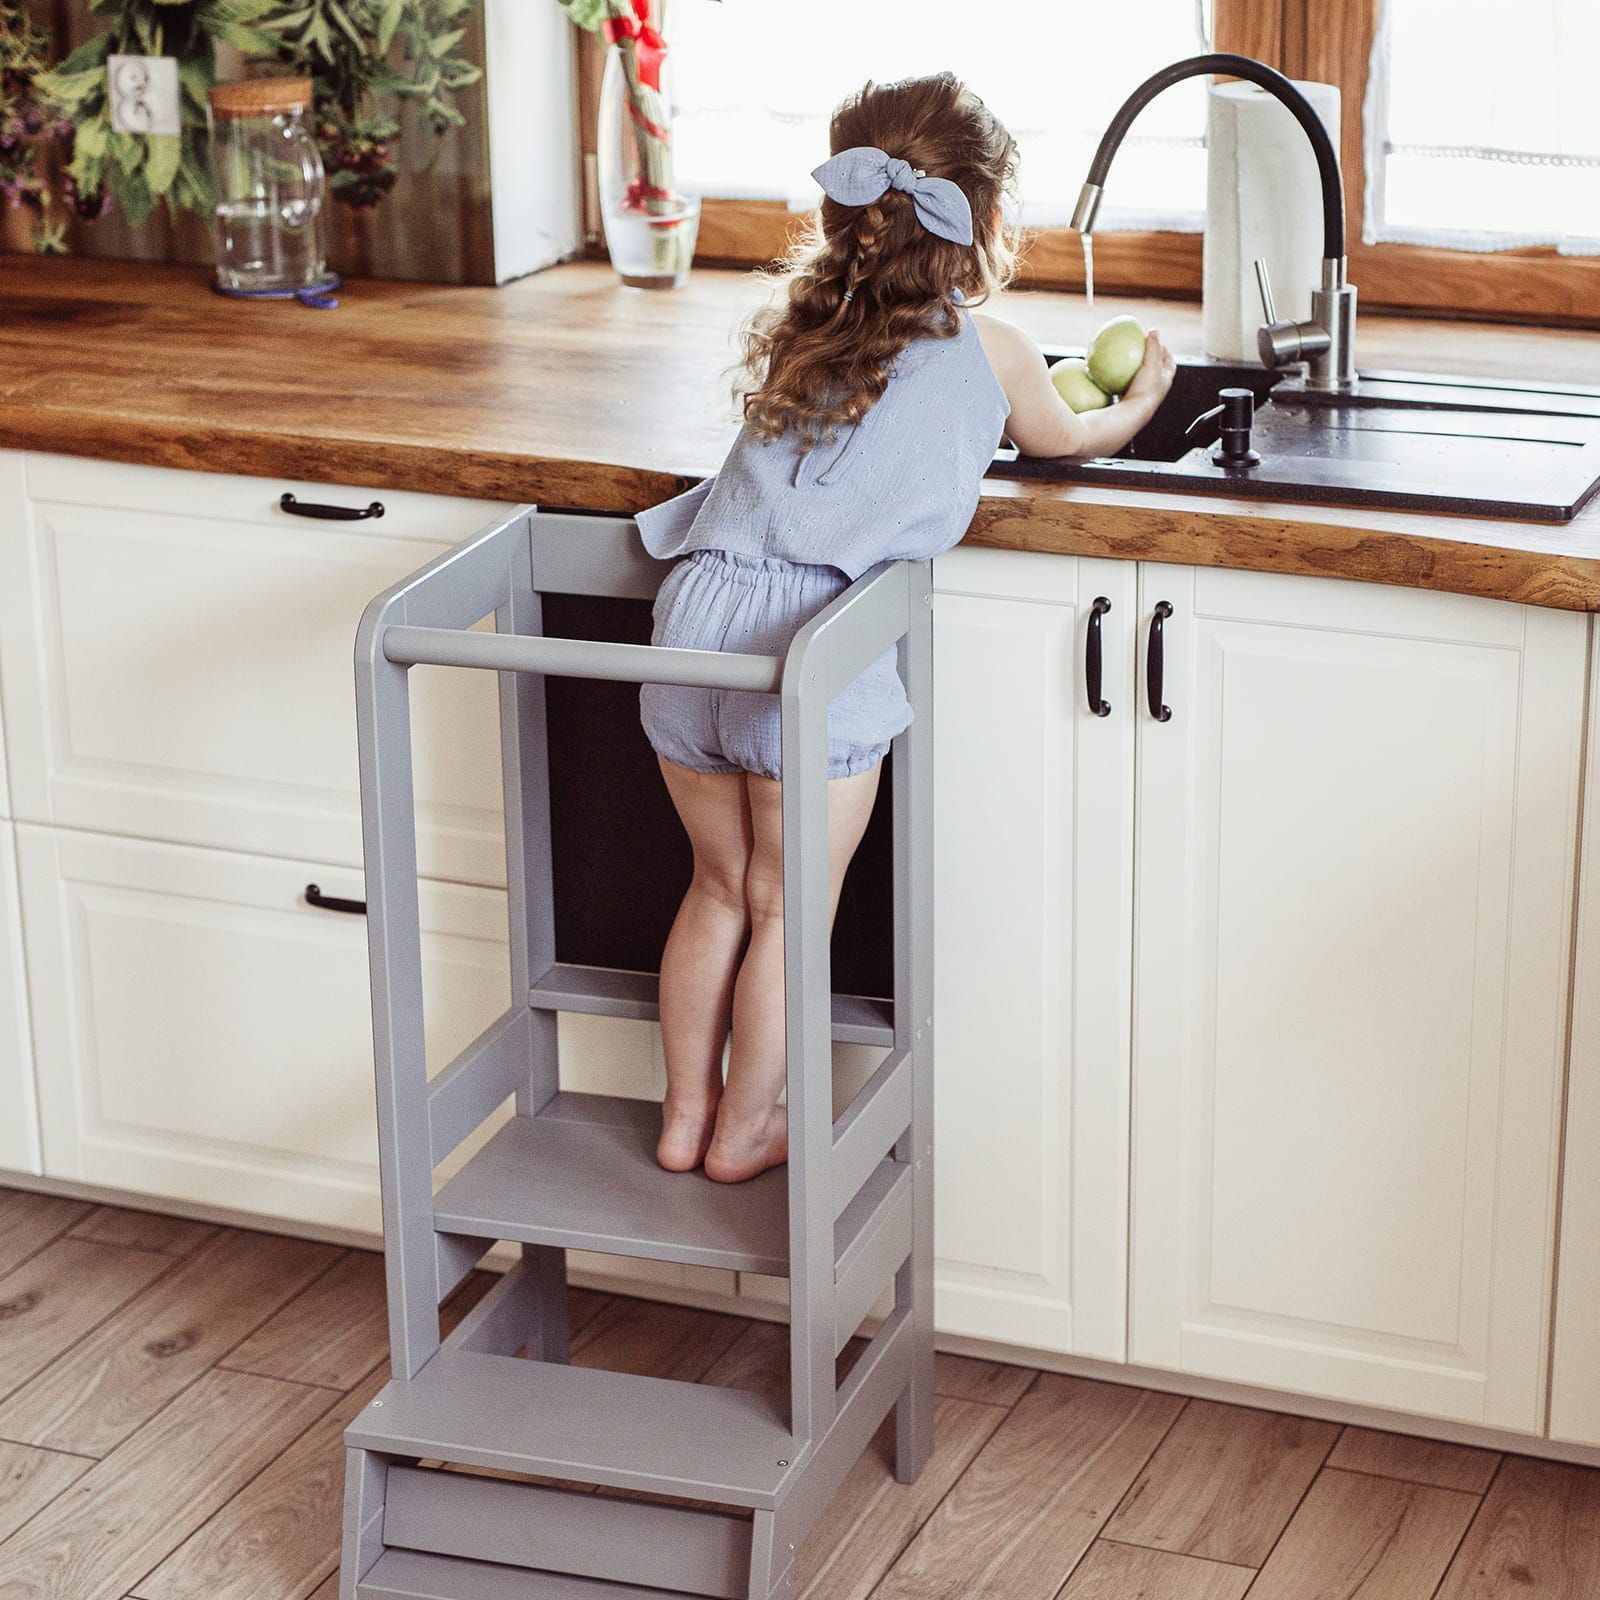 MeowBaby Wooden Kitchen Helper - Learning Tower With Board For Kids